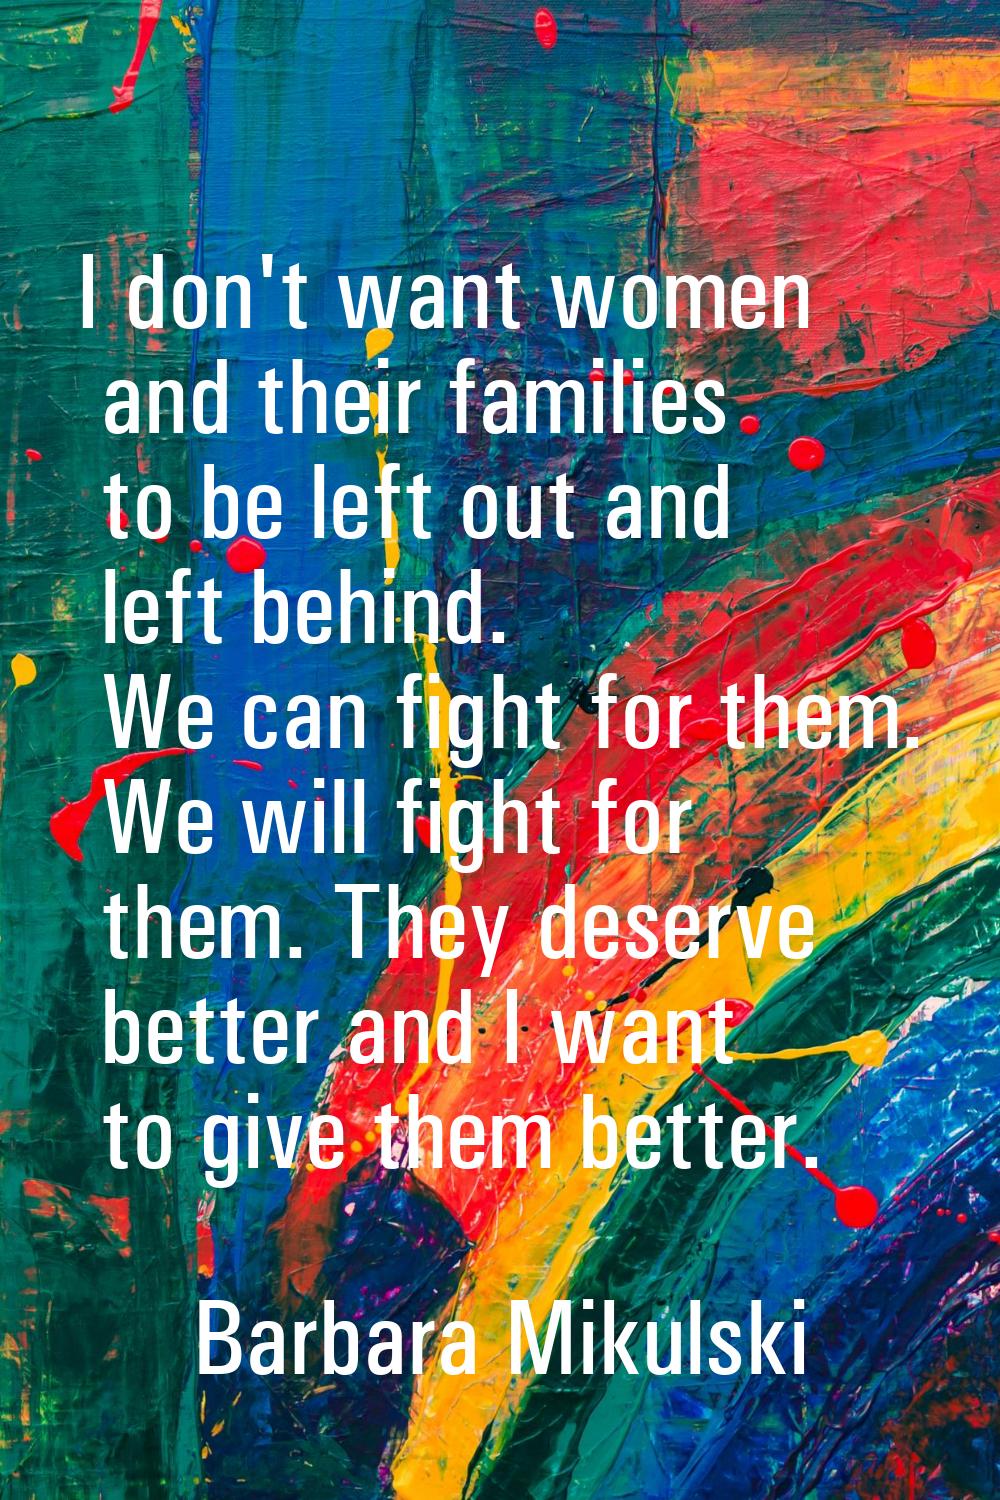 I don't want women and their families to be left out and left behind. We can fight for them. We wil